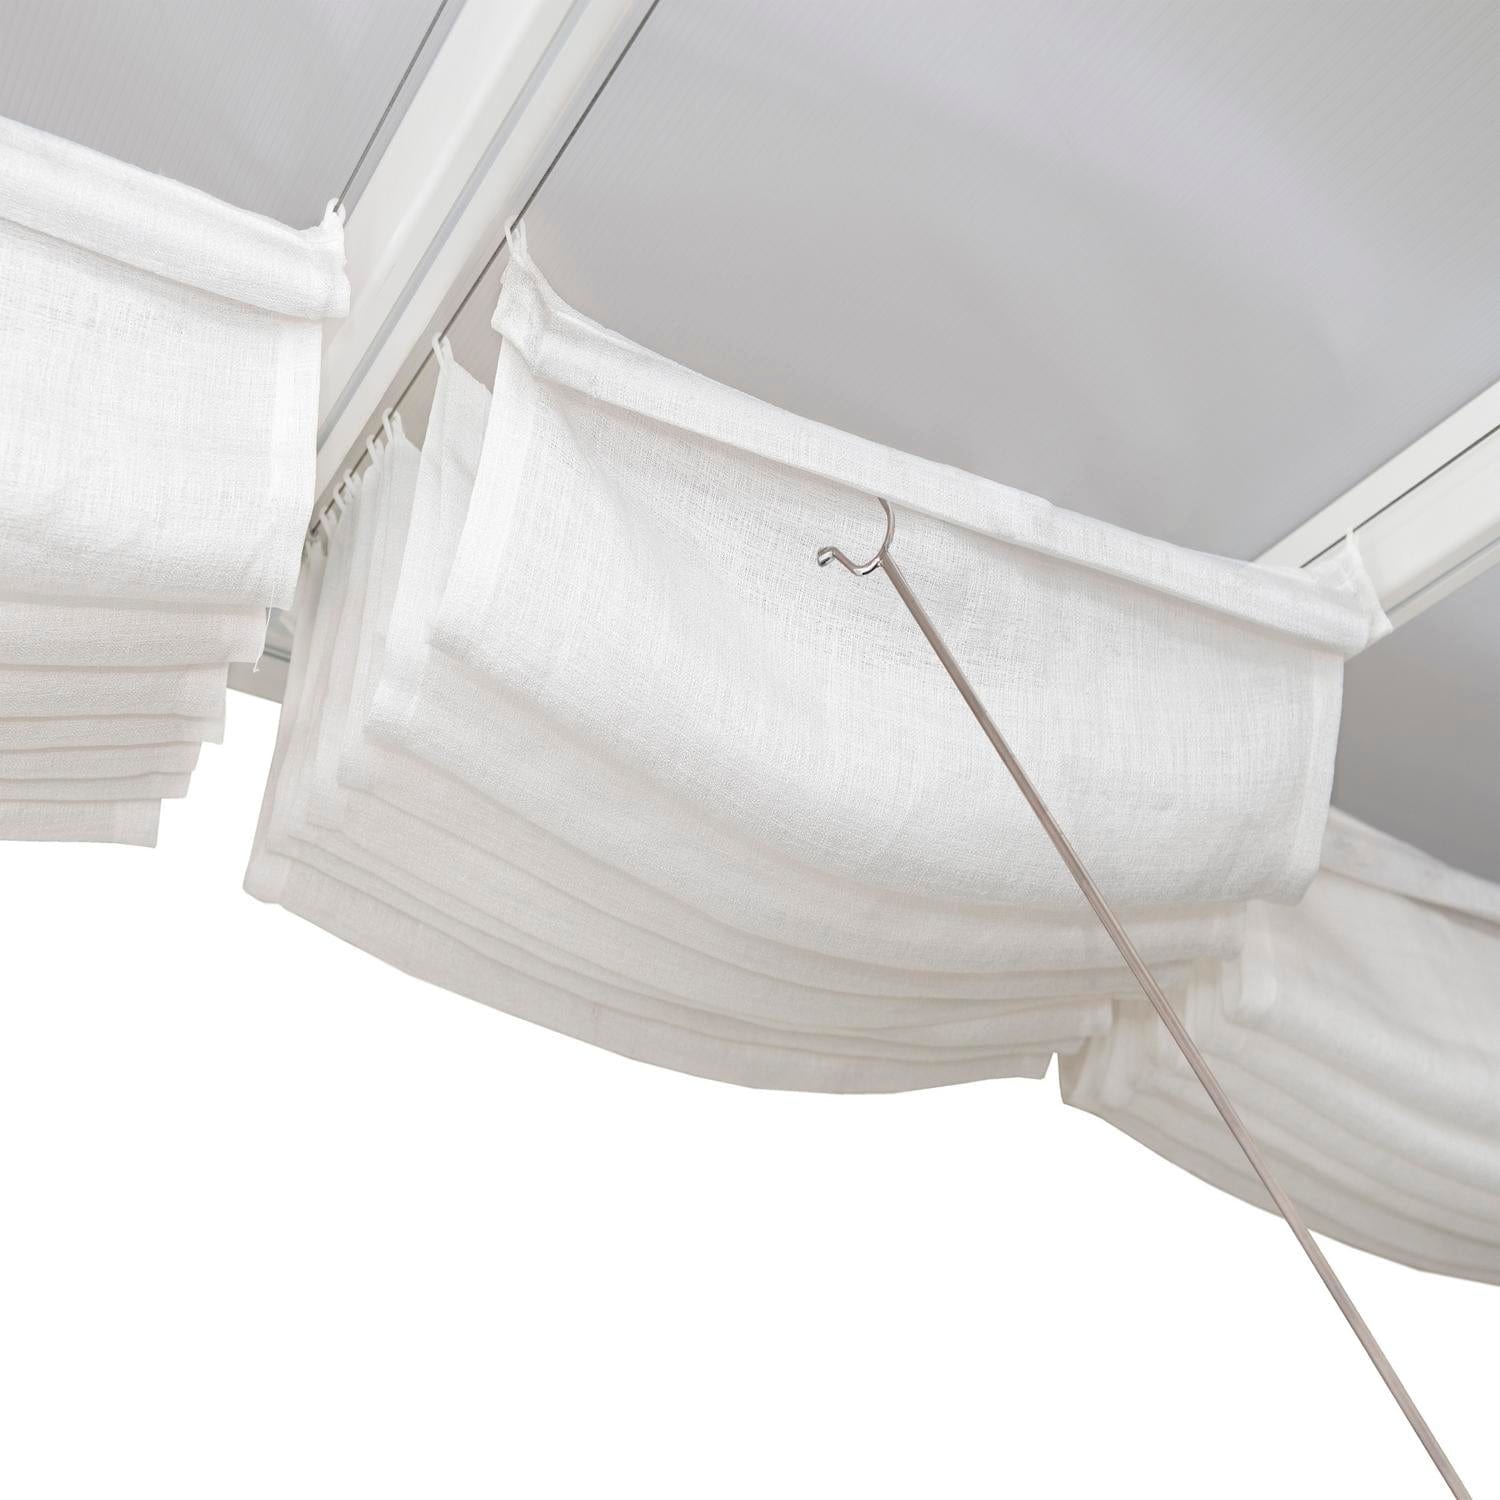 Palram - Canopia Patio Cover Accessories Palram - Canopia | Patio Cover Blinds 10x18 ft - White HG1073